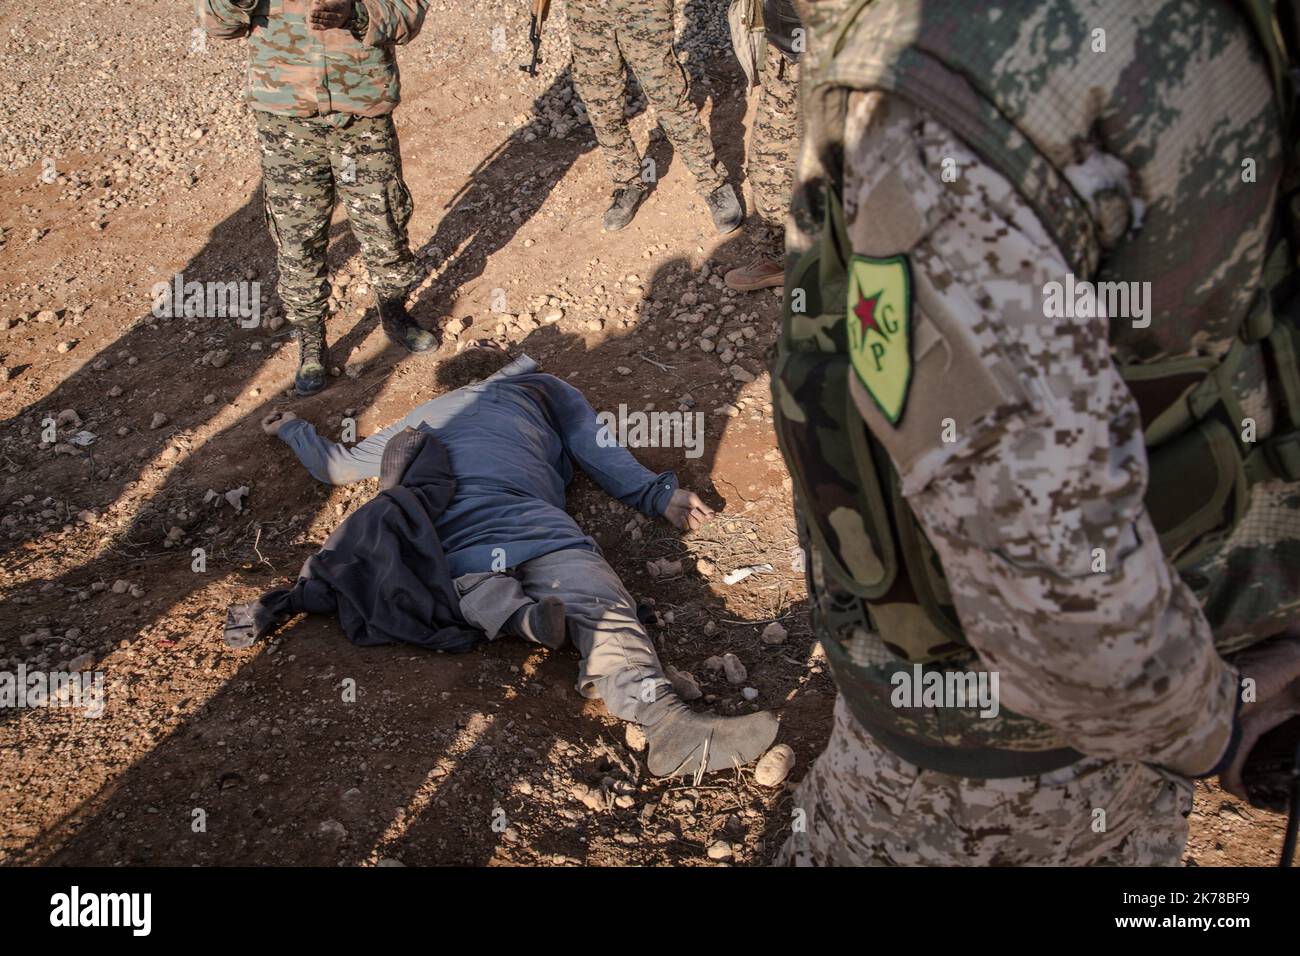 SYRIA / North Syria / SHE BHER village - A dead body of a memeber of ISIS - the YPG platoon has just liberate the village from ISIS, this place is not far from Raqqa. Stock Photo